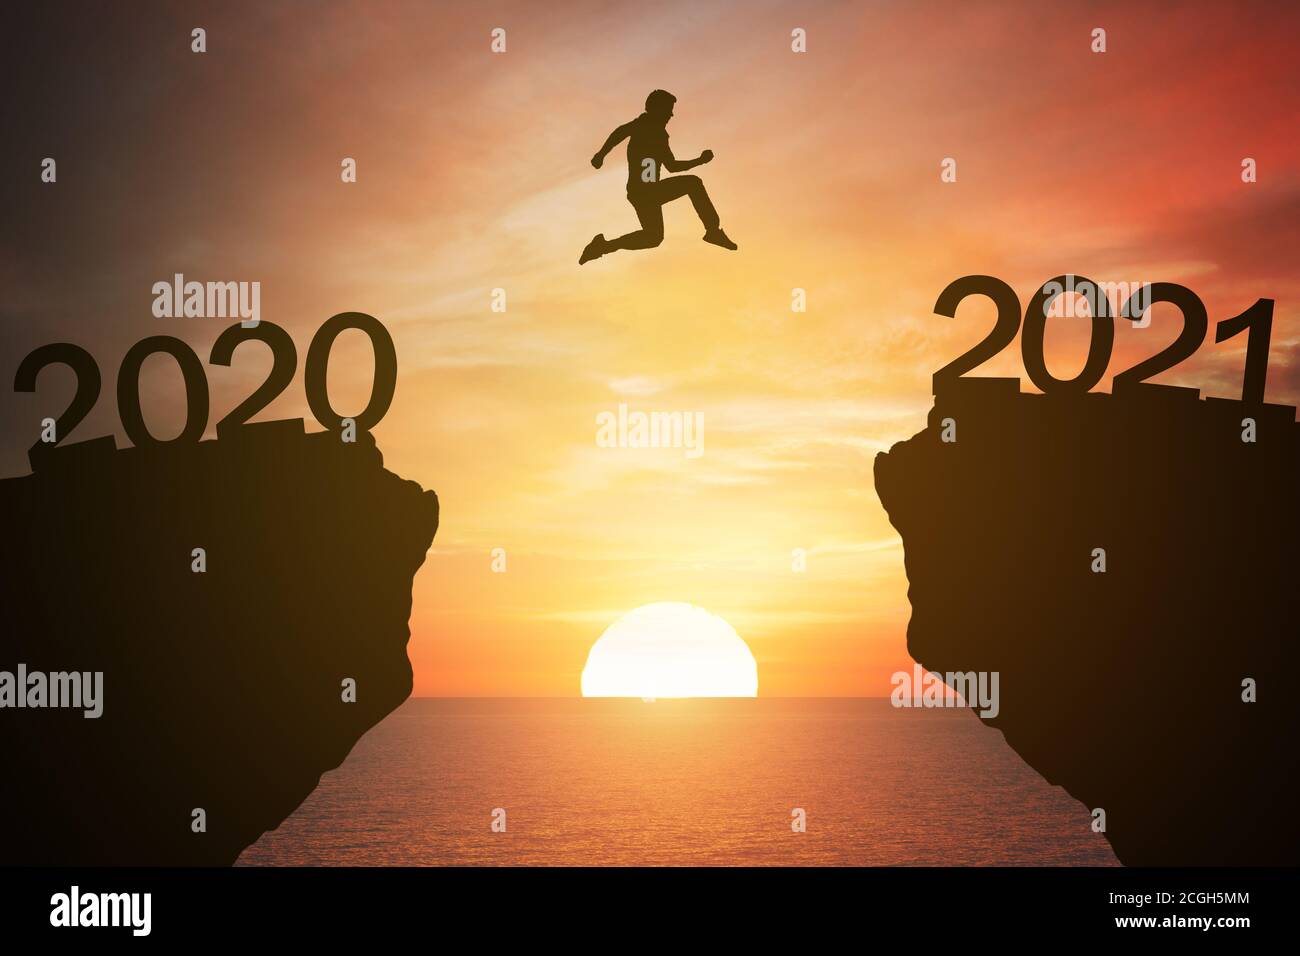 silhouette man jump from the mountain from 2020 to 2021 years with the sunset or sunrise background. Happy and success growth with new year 2021 conce Stock Photo